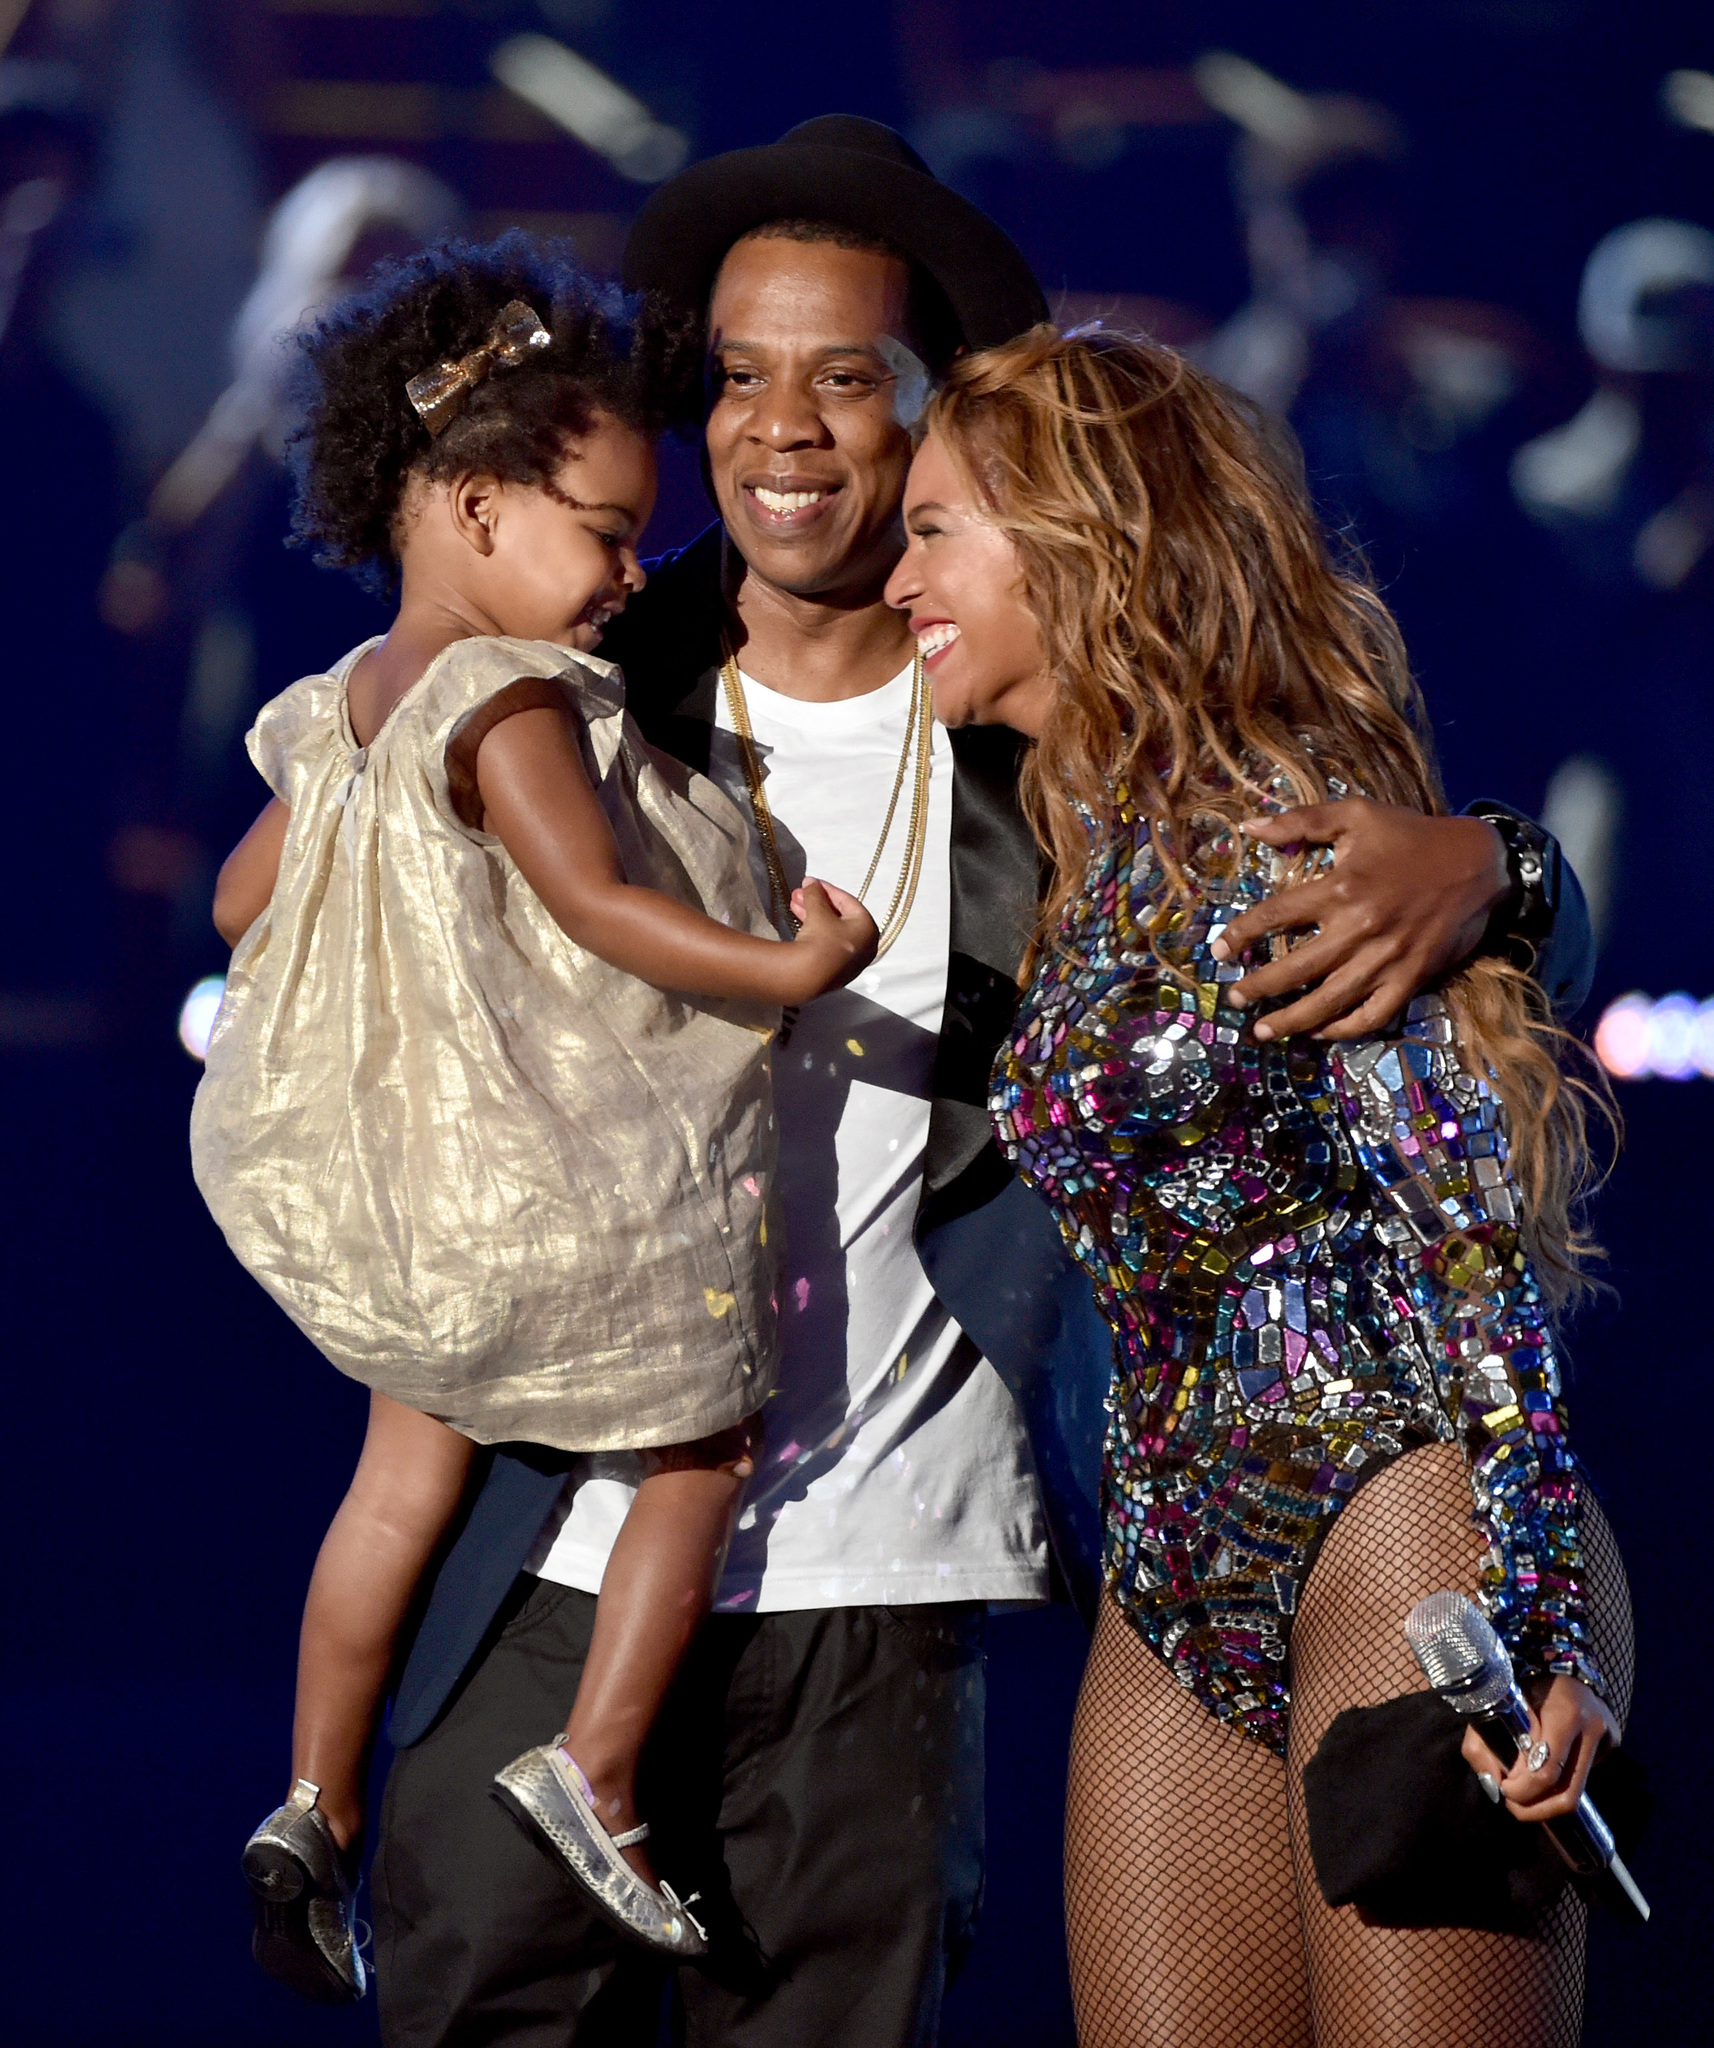 Jay Z, Beyoncé Knowles and Blue Ivy Carter at event of 2014 MTV Video Music Awards (2014)